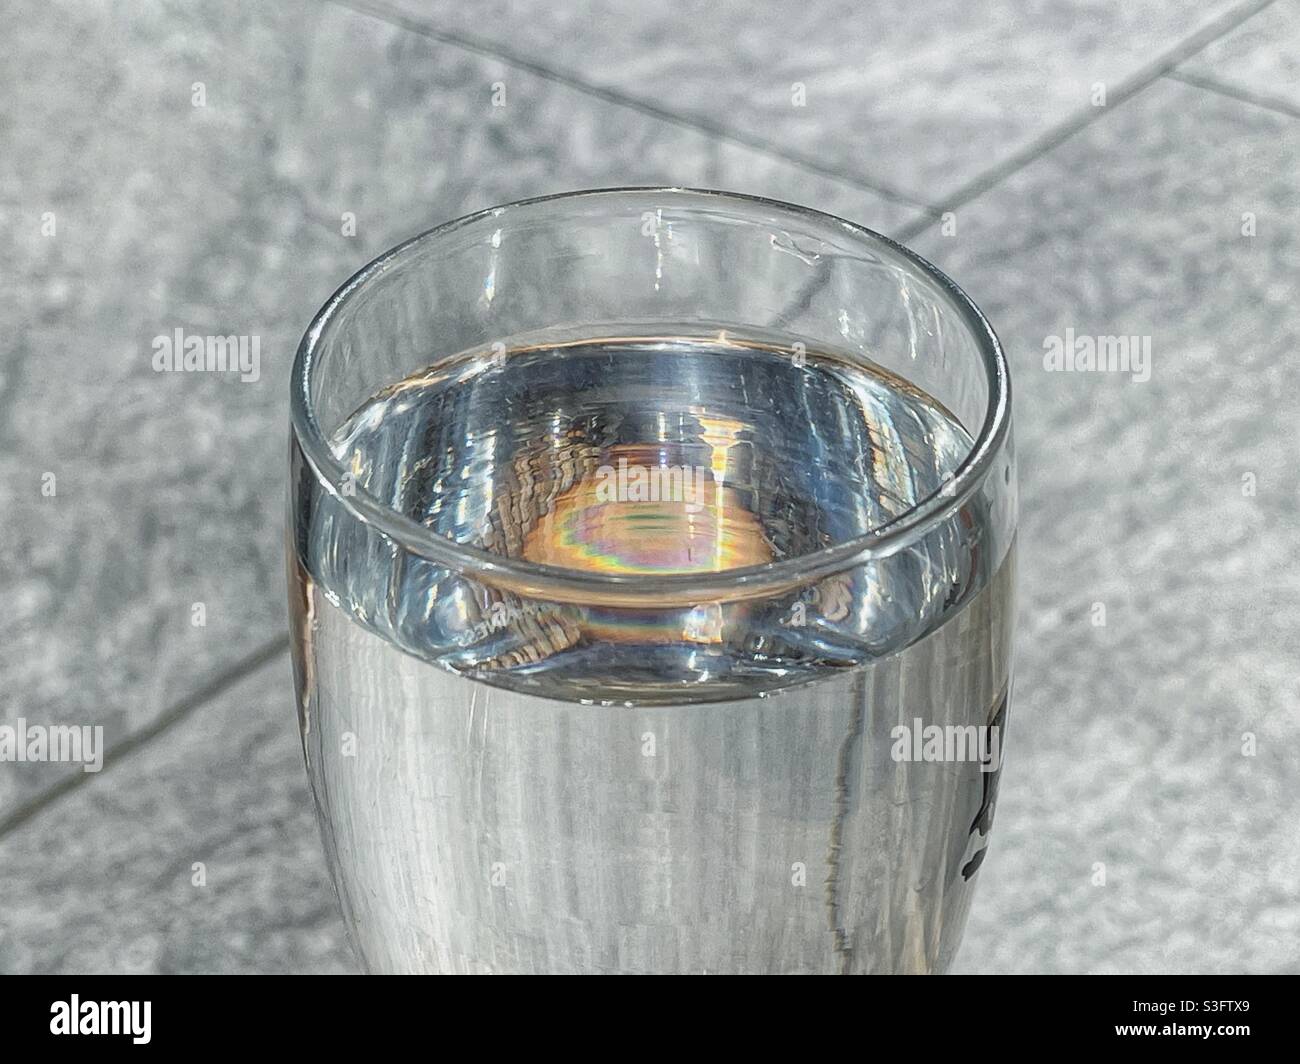 Pint glass of water backlit by sunlight against the plain background of a garden patio Stock Photo